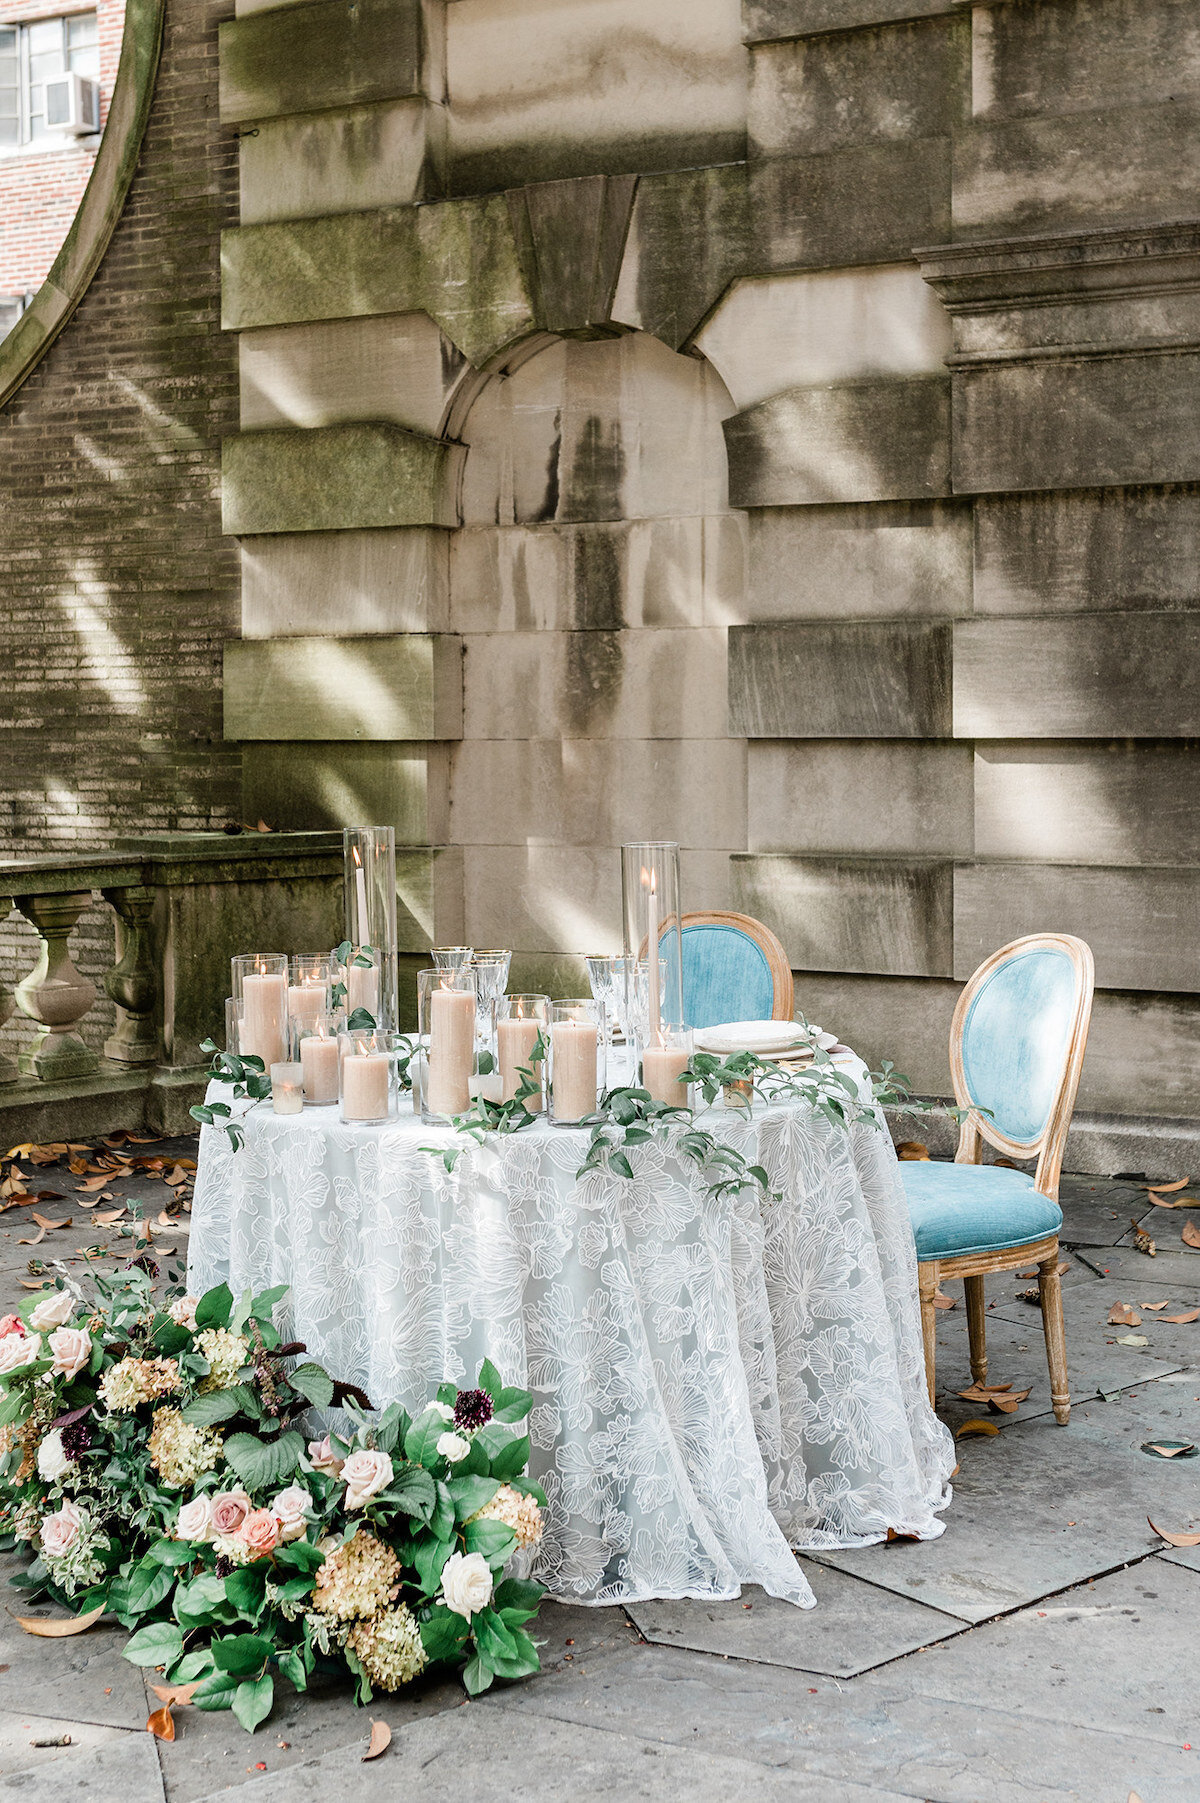 From grand celebrations to quiet exchanges, our luxury wedding photography in DC portrays the genuine beauty of your love story. Our fine art lens turns fleeting moments into everlasting art, against the backdrop of The Larz Anderson House's opulence.